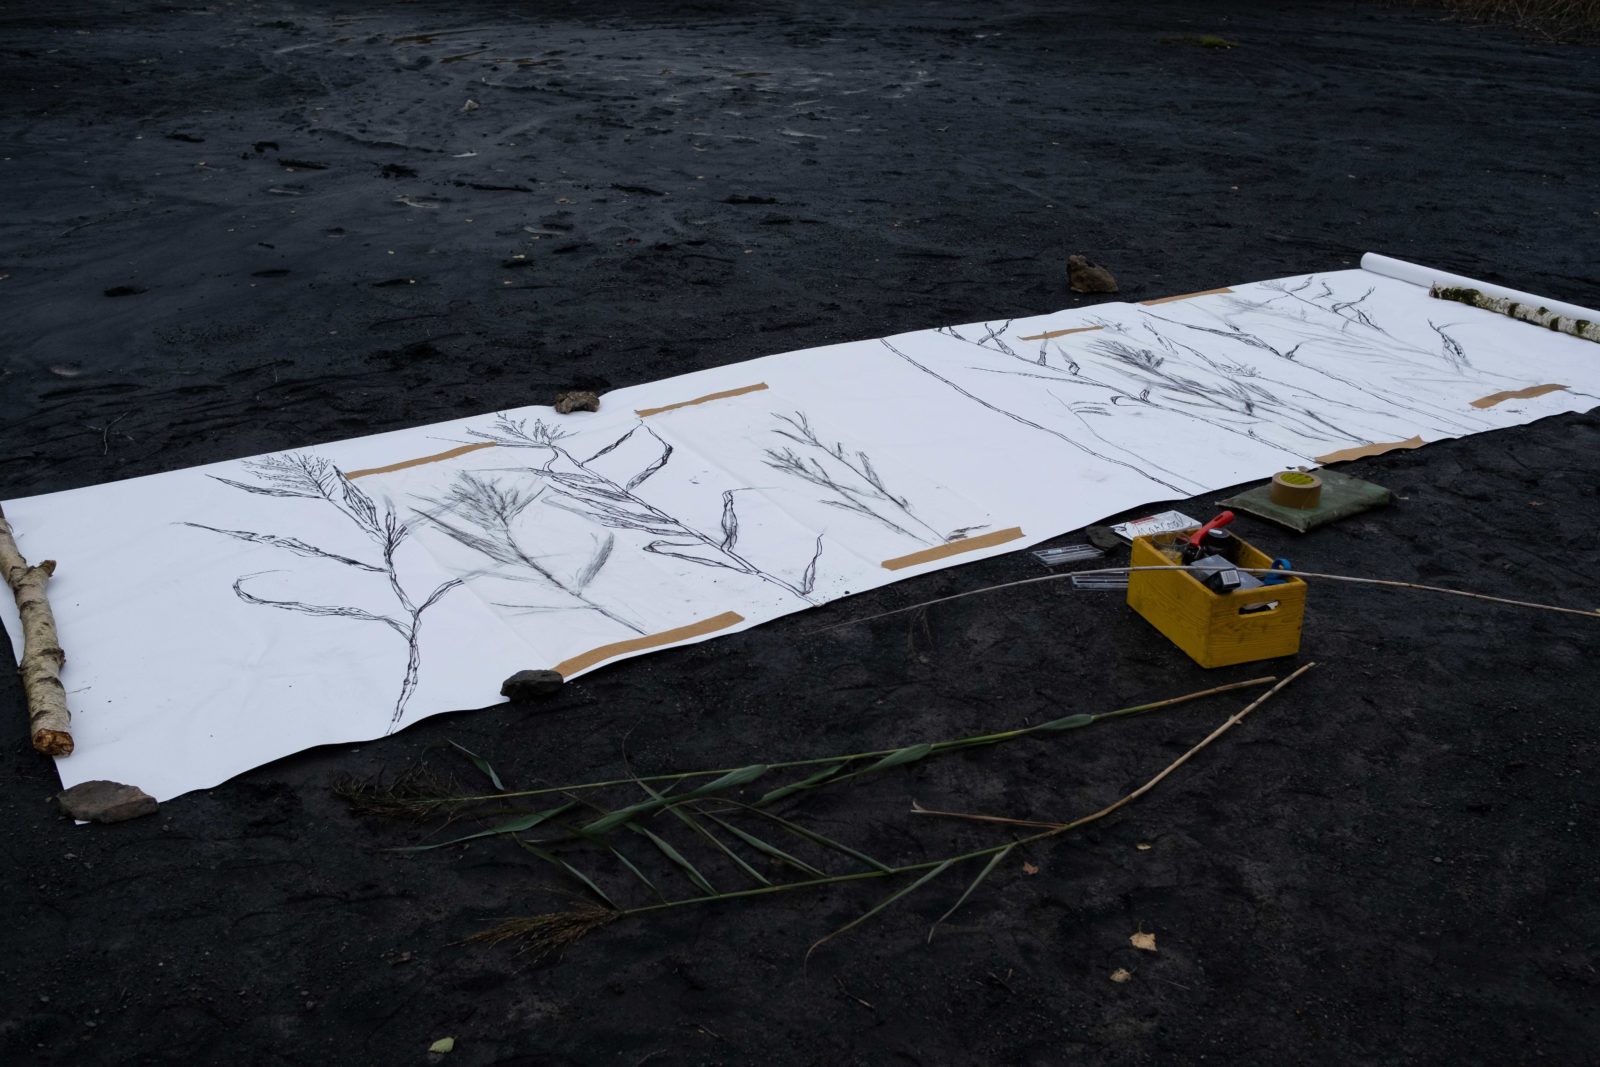 The unfinished artwork is photographed laid out on the ground which is black. The artwork is a long horizontal roll of paper with charcoal line drawings of stalks on it.